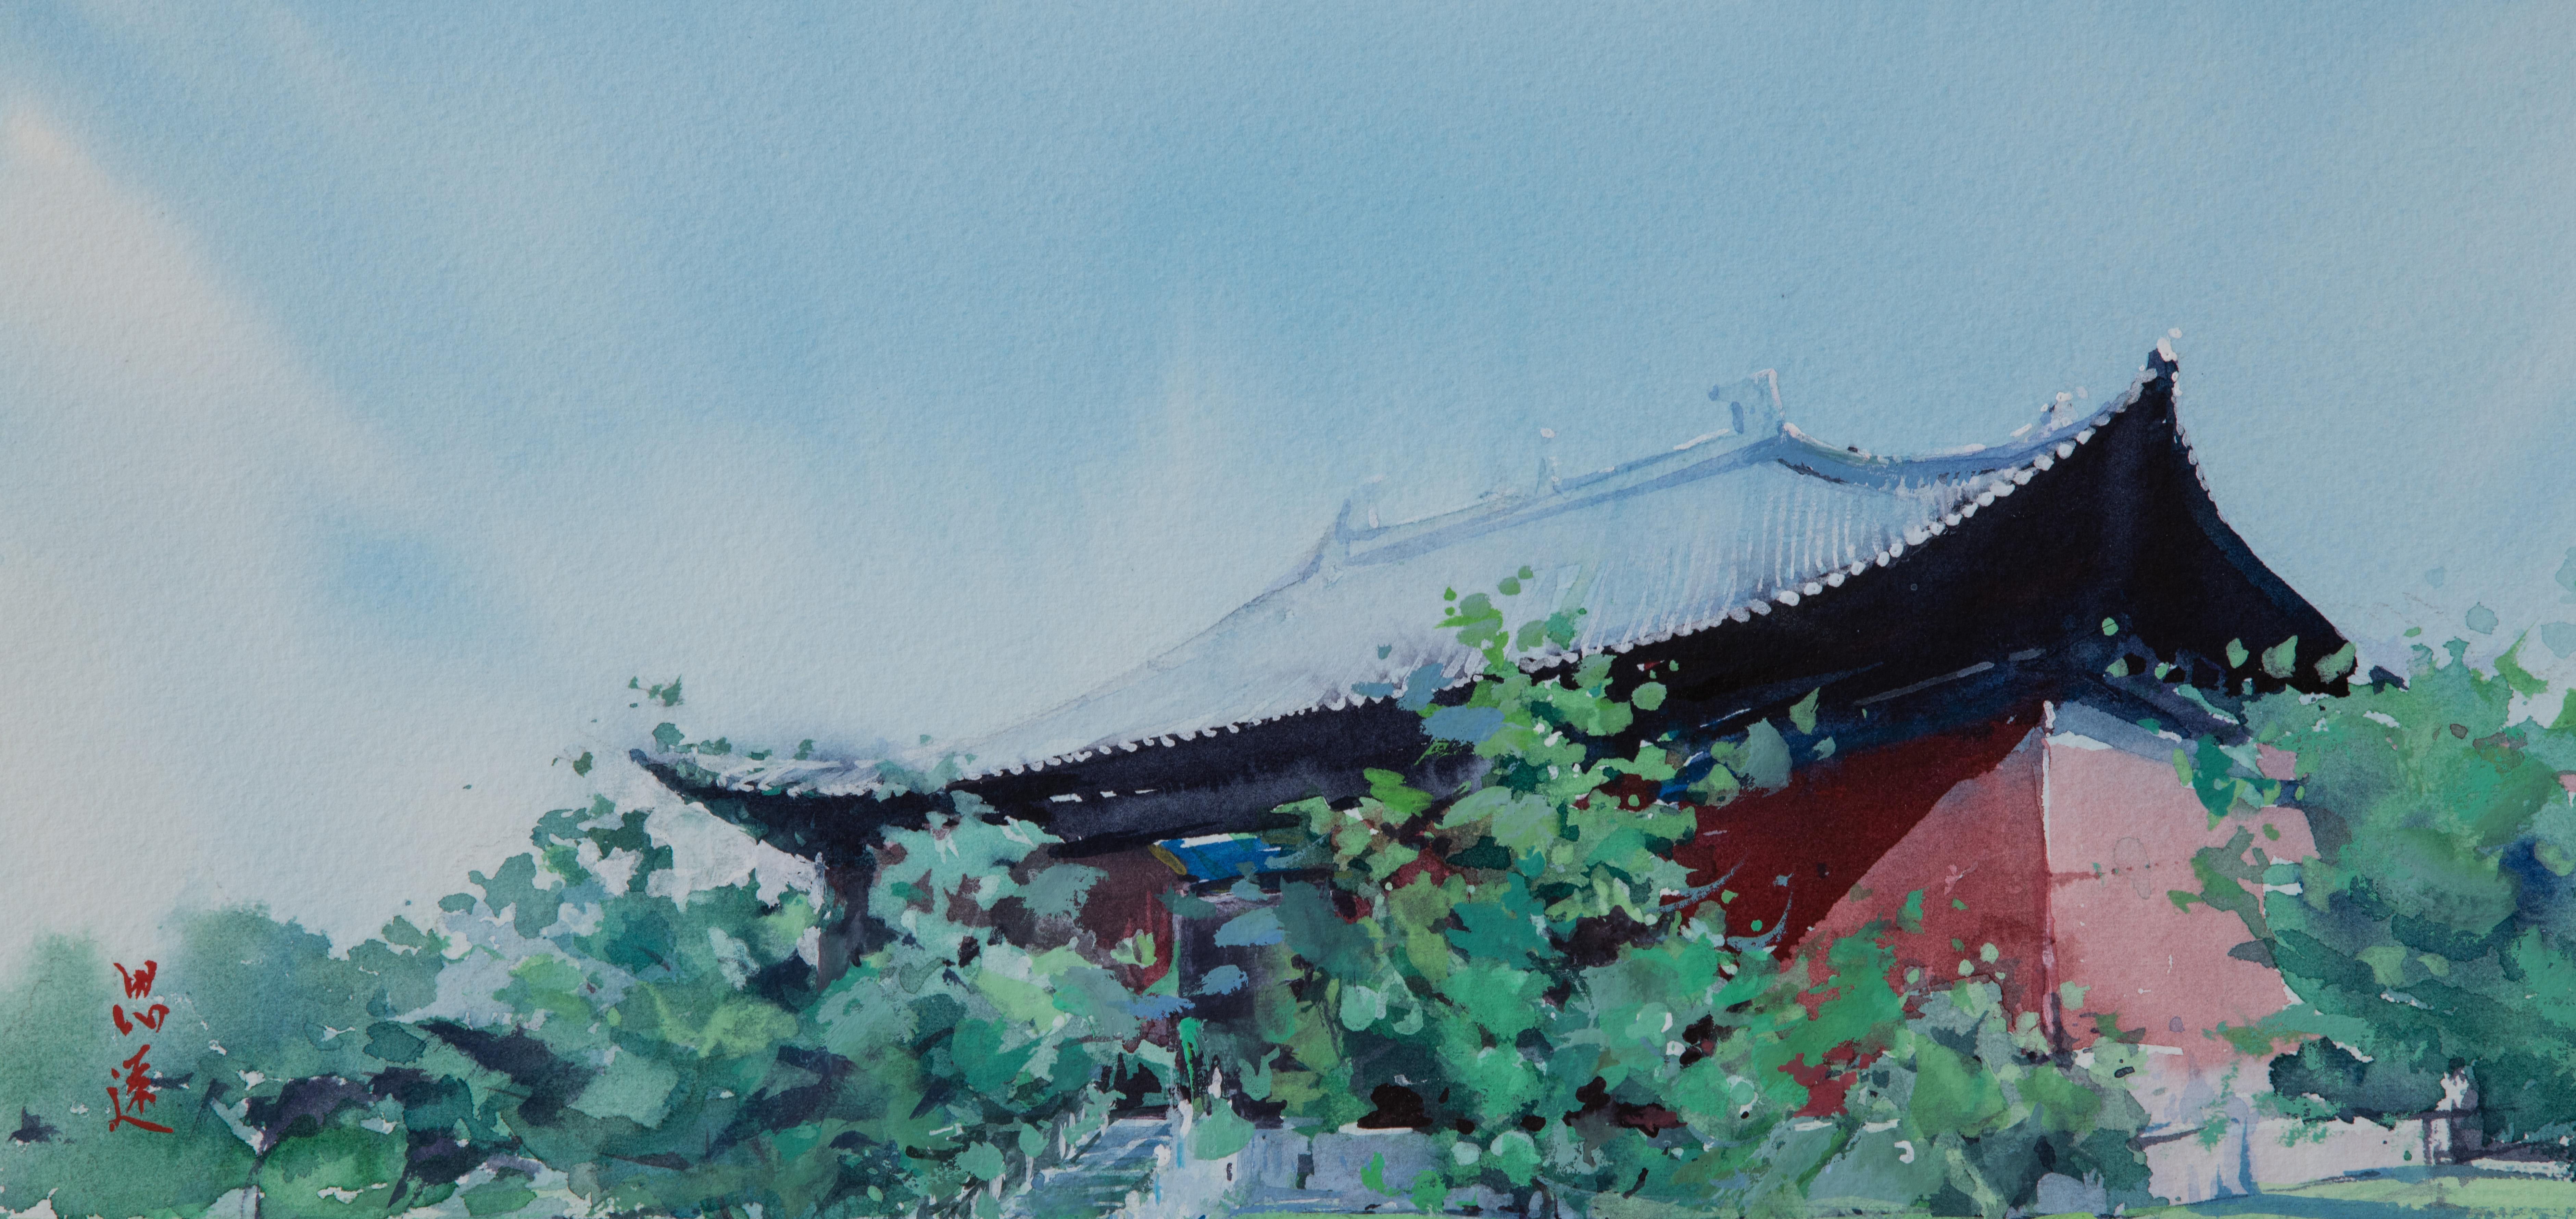 Watercolor Impressions of Chinese Architecture 6, Original Painting - Art by Siyuan Ma